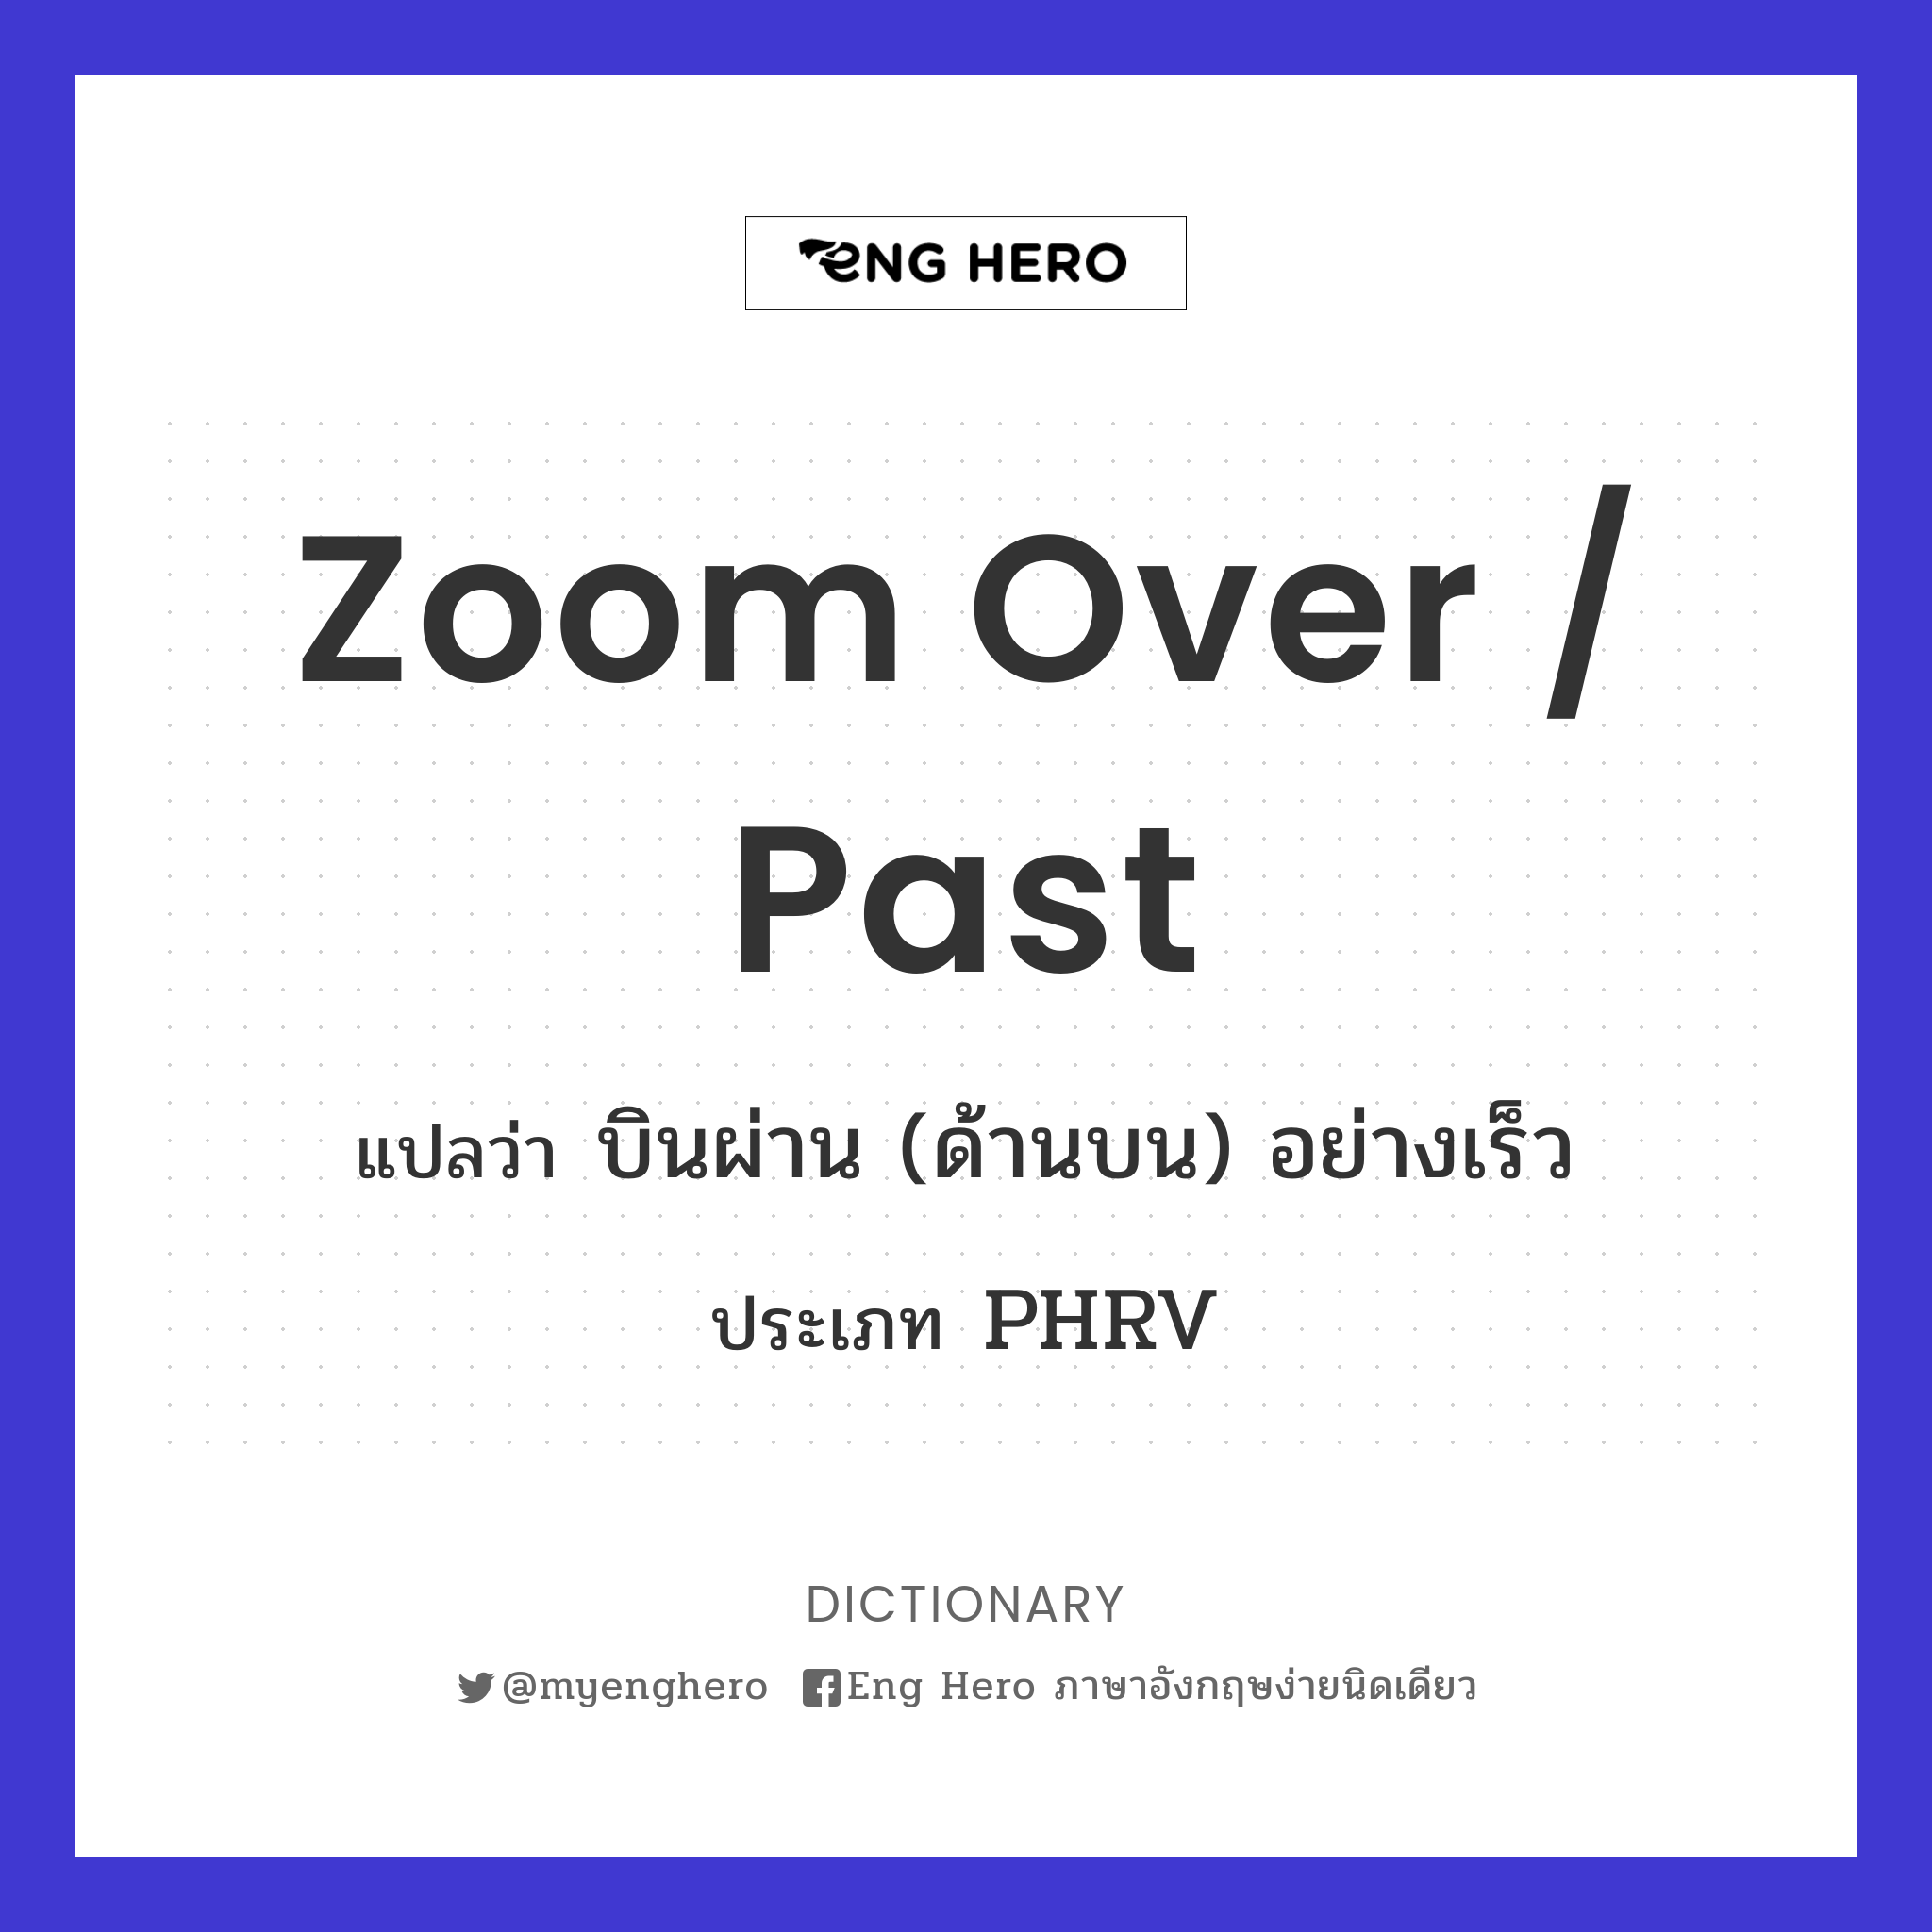 zoom over / past